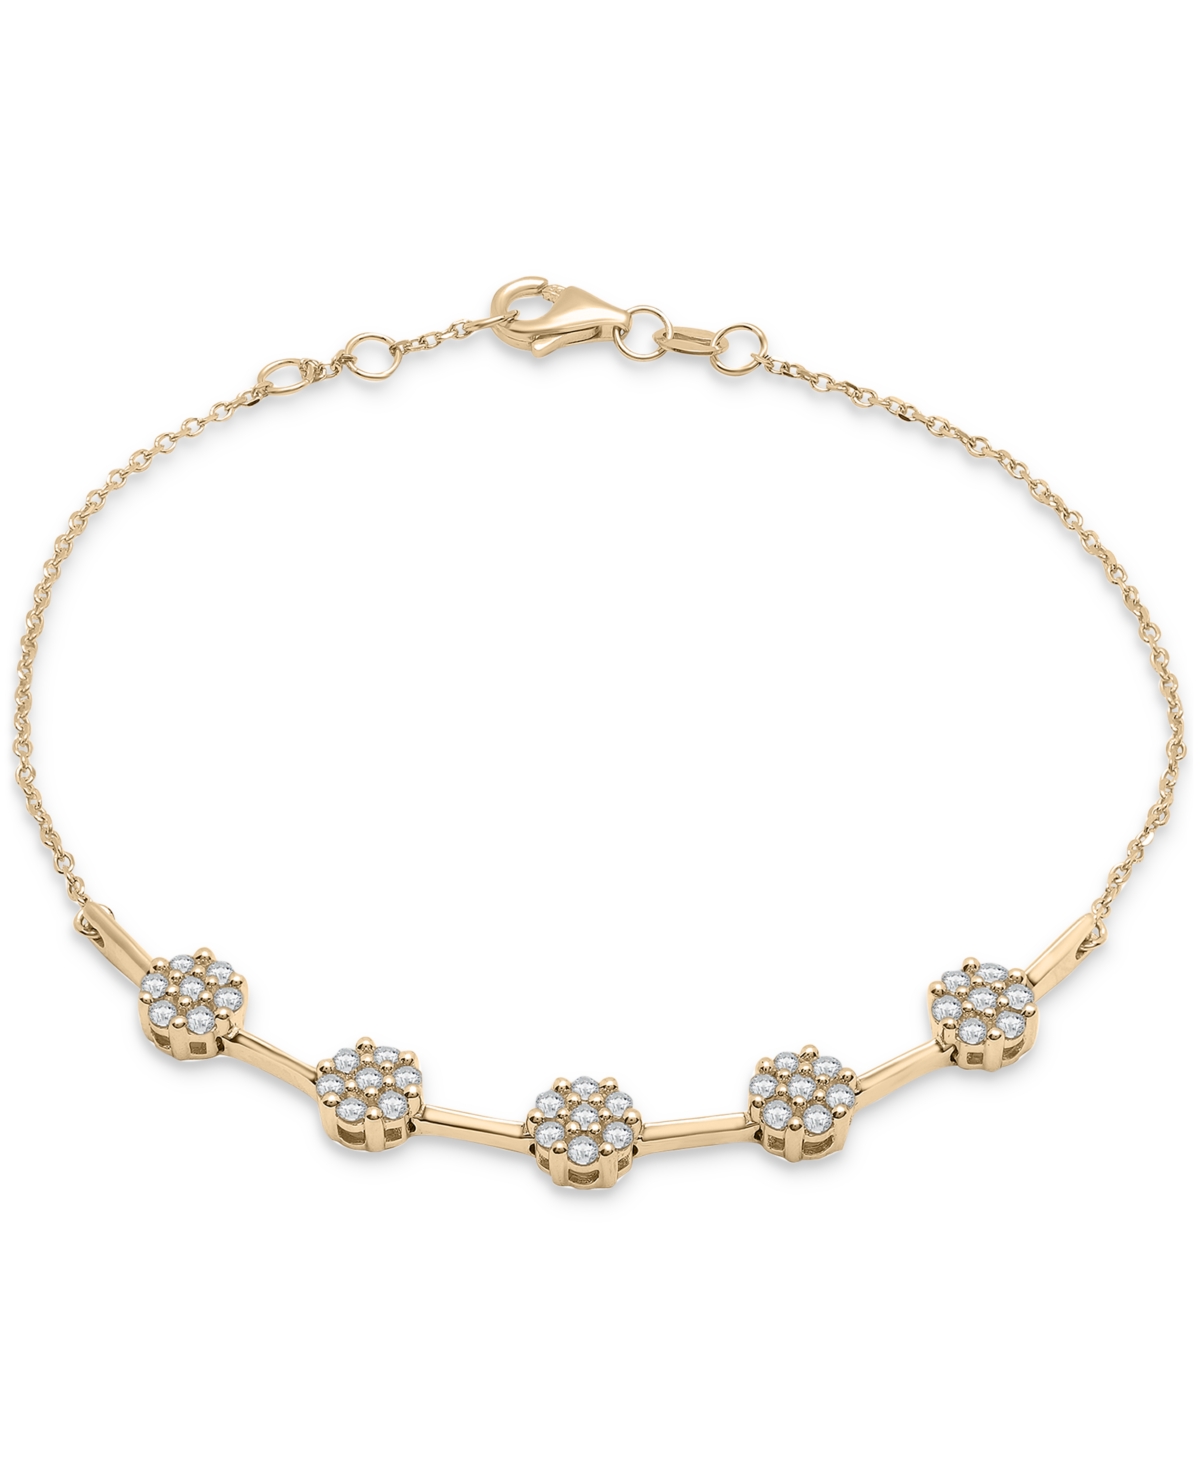 Diamond Flower Cluster Link Bracelet (1/2 ct. t.w.) in 10k Gold, Created for Macy's - Yellow Gold